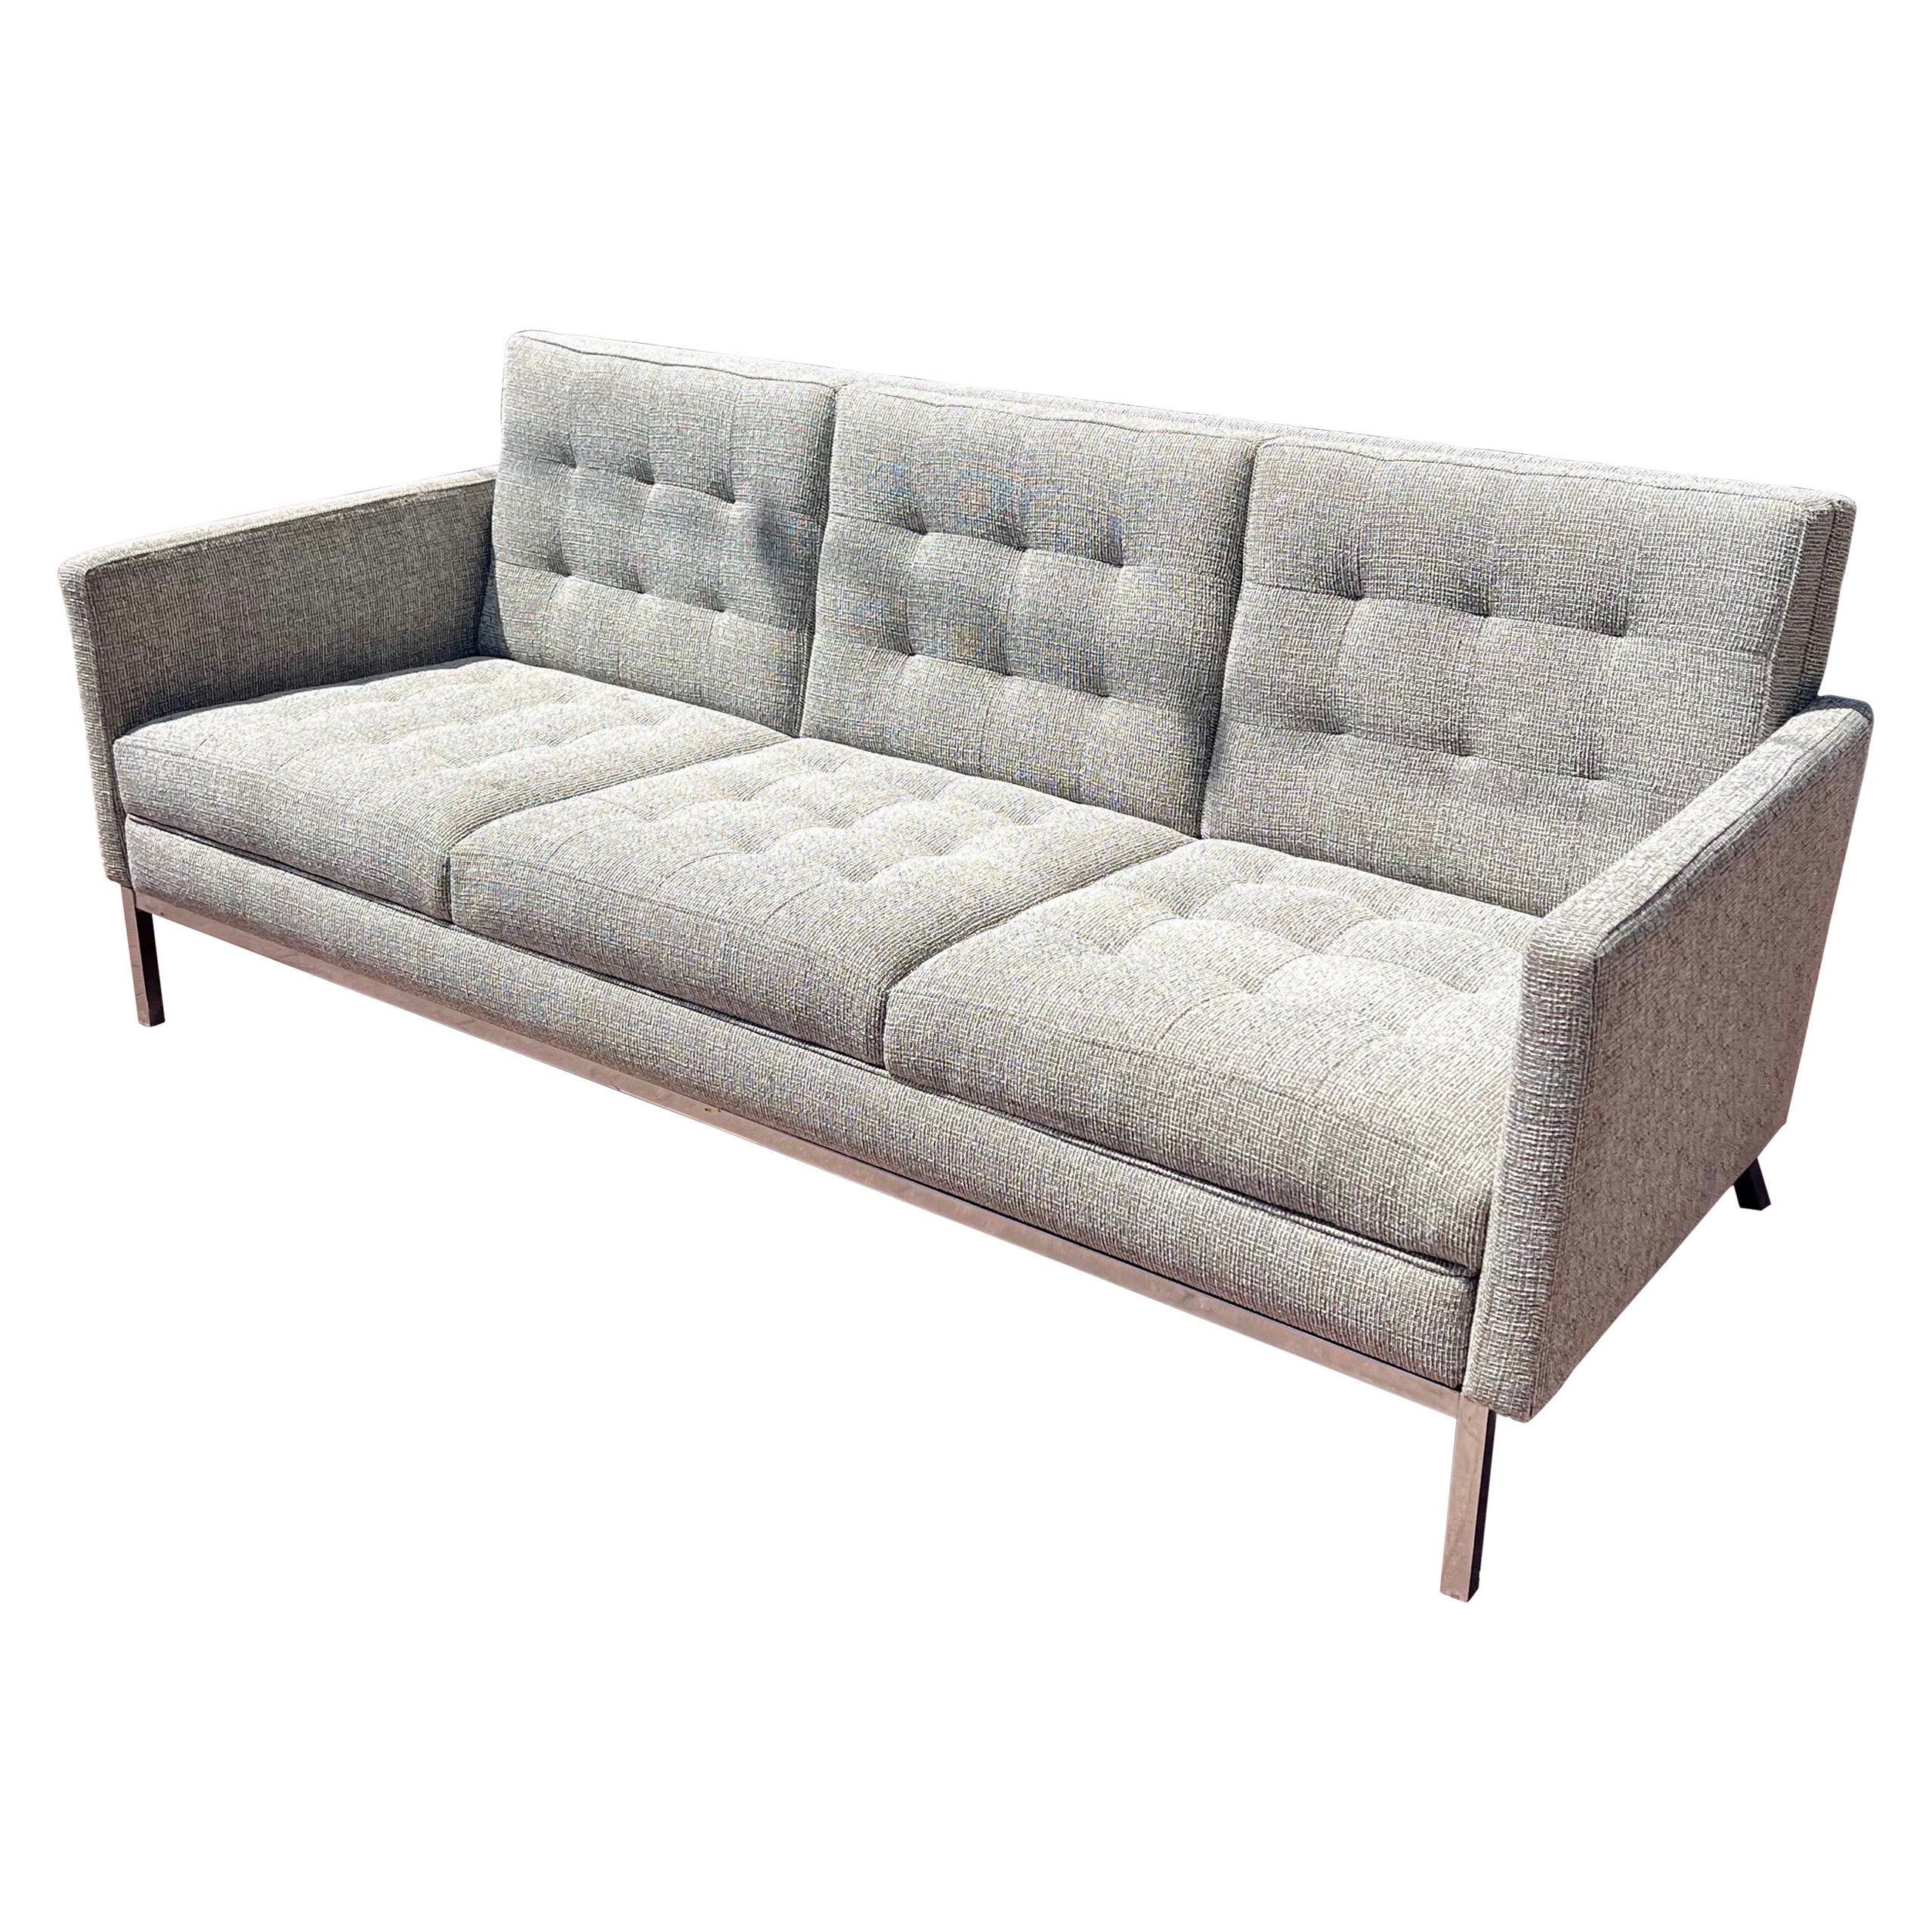 American Mid Century Modern Steelcase 3 Seater Sofa Chrome Base New Fabric For Sale